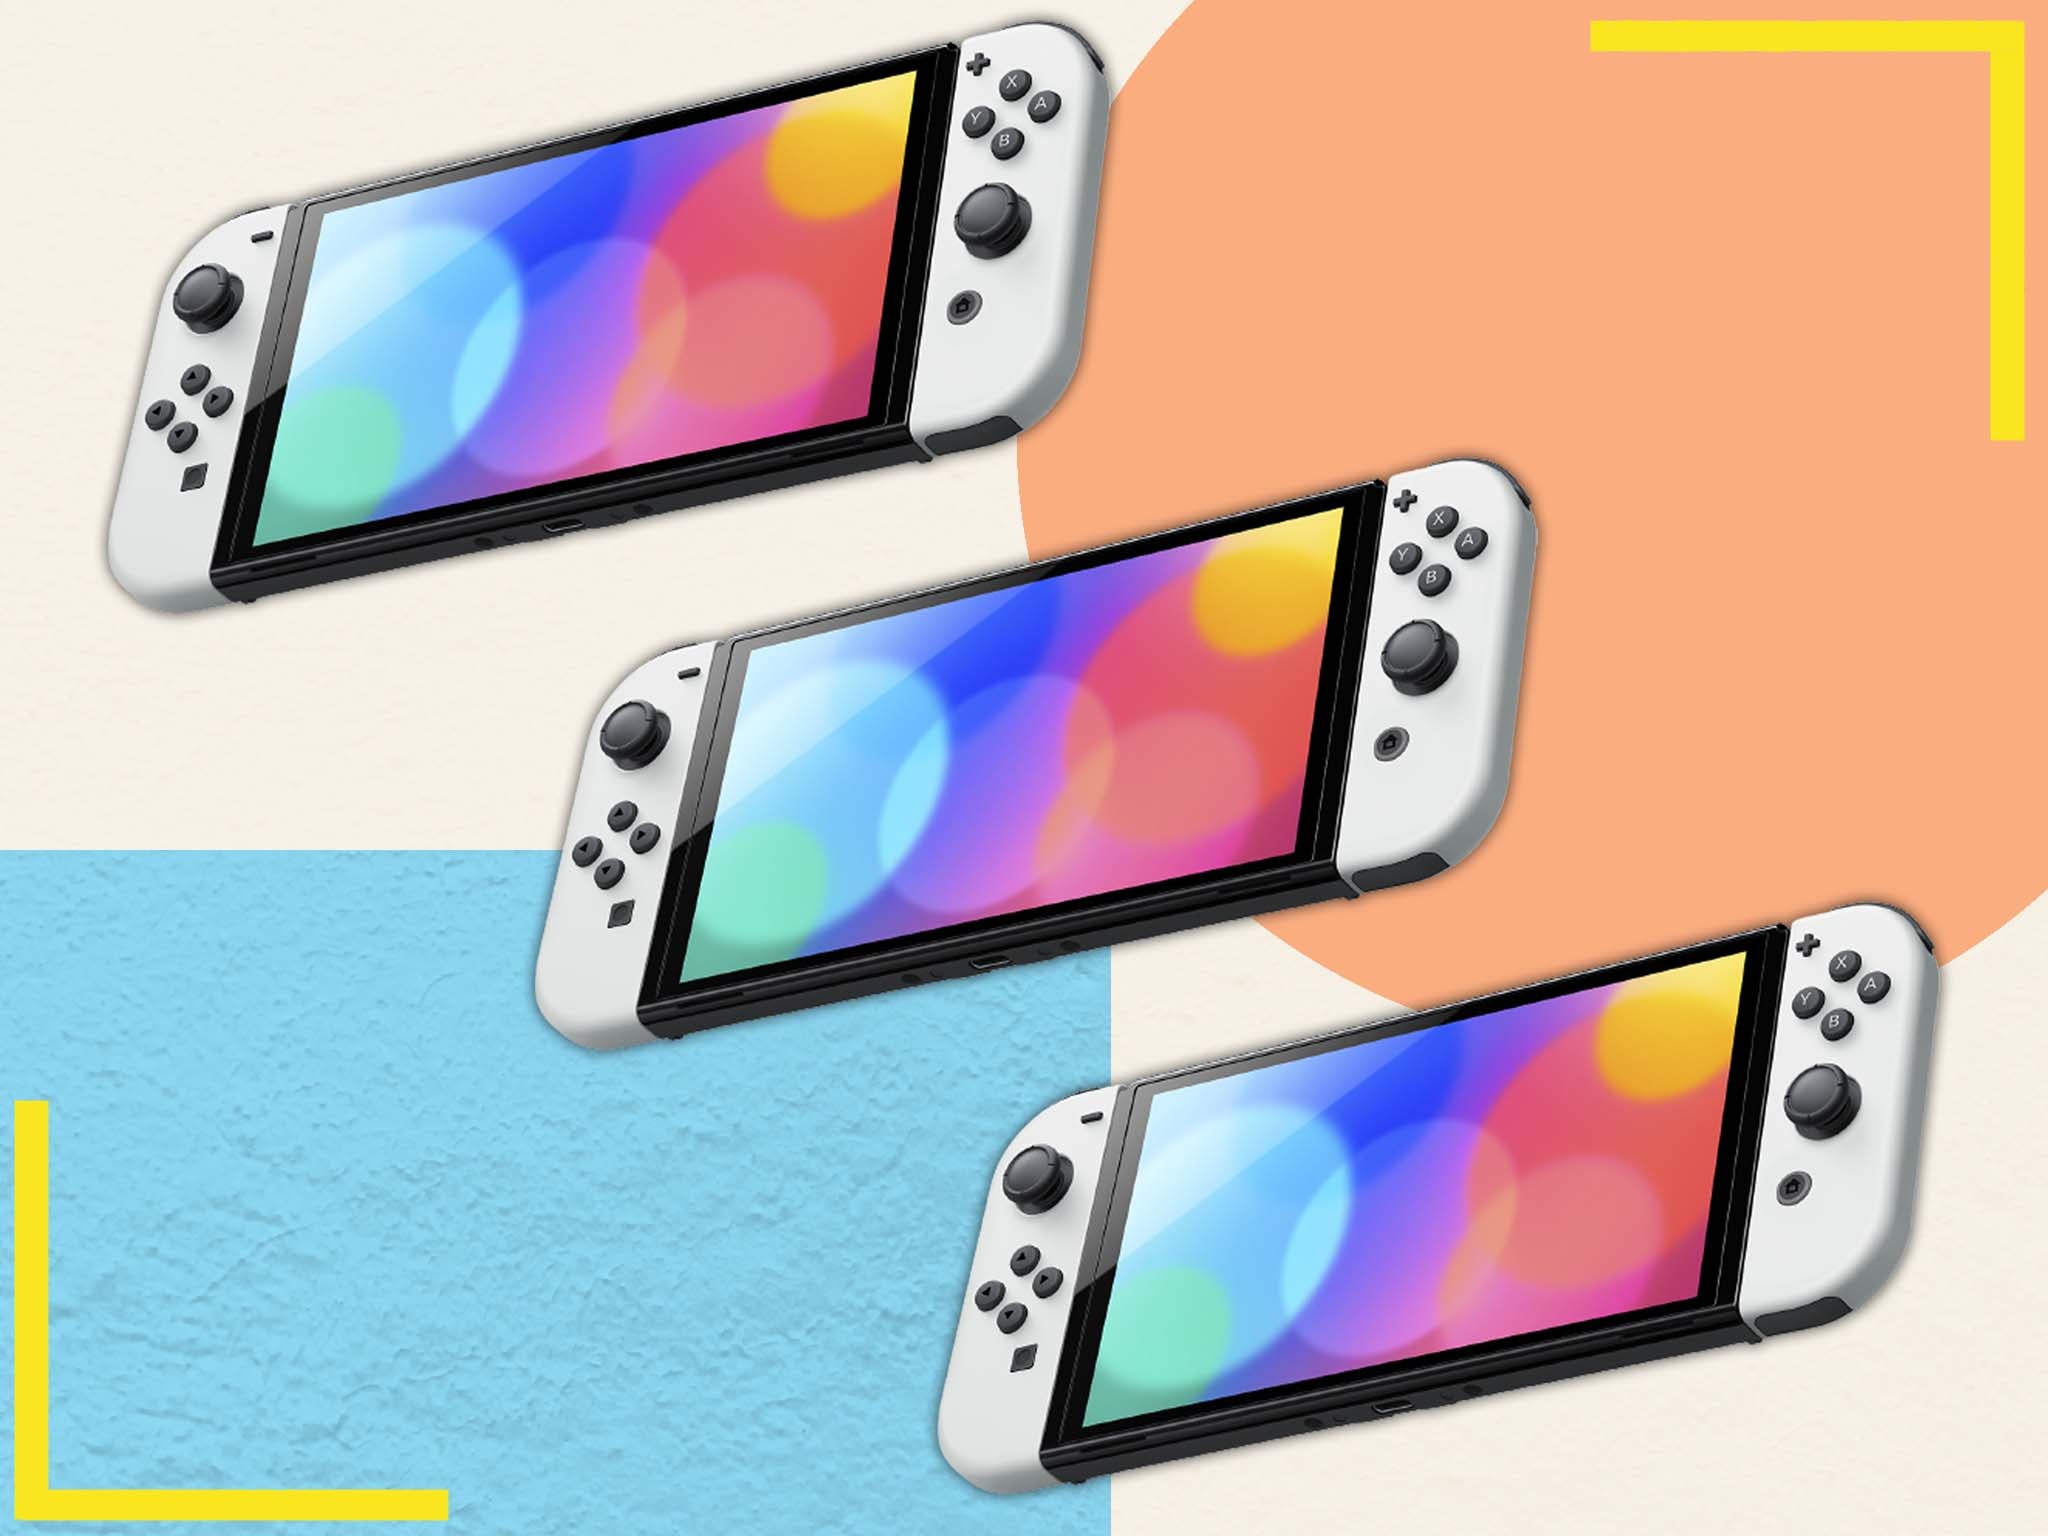 It’s set to be the flagship of the Nintendo Switch range, with more storage, a redesigned kickstand and a new, improved display